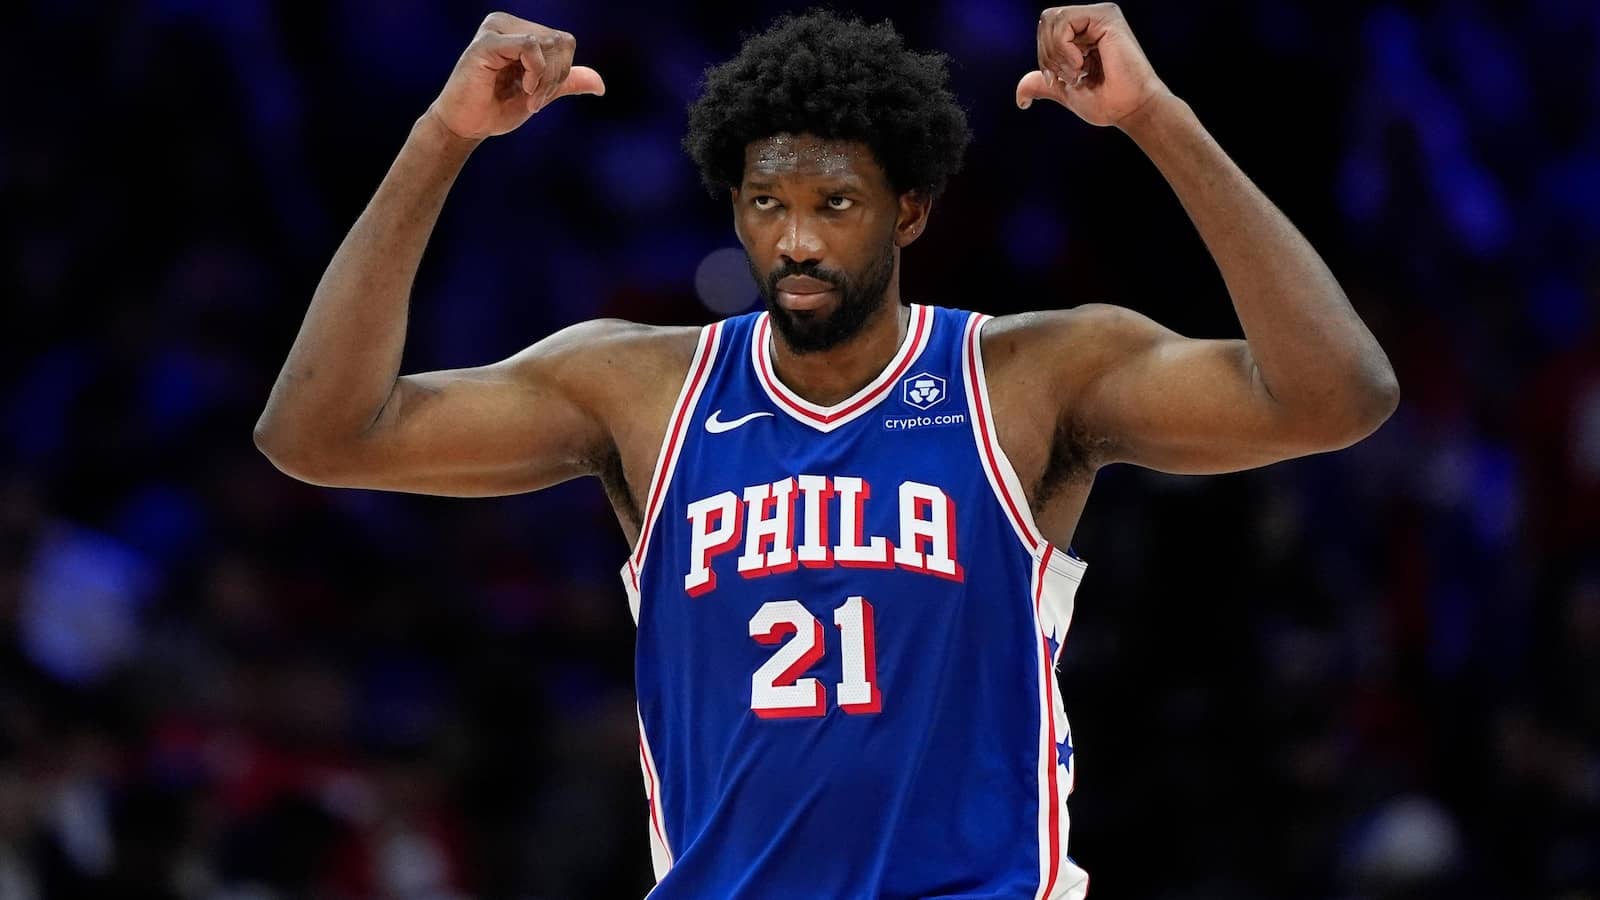 What to know about Bell’s palsy, the facial paralysis affecting Joel Embiid